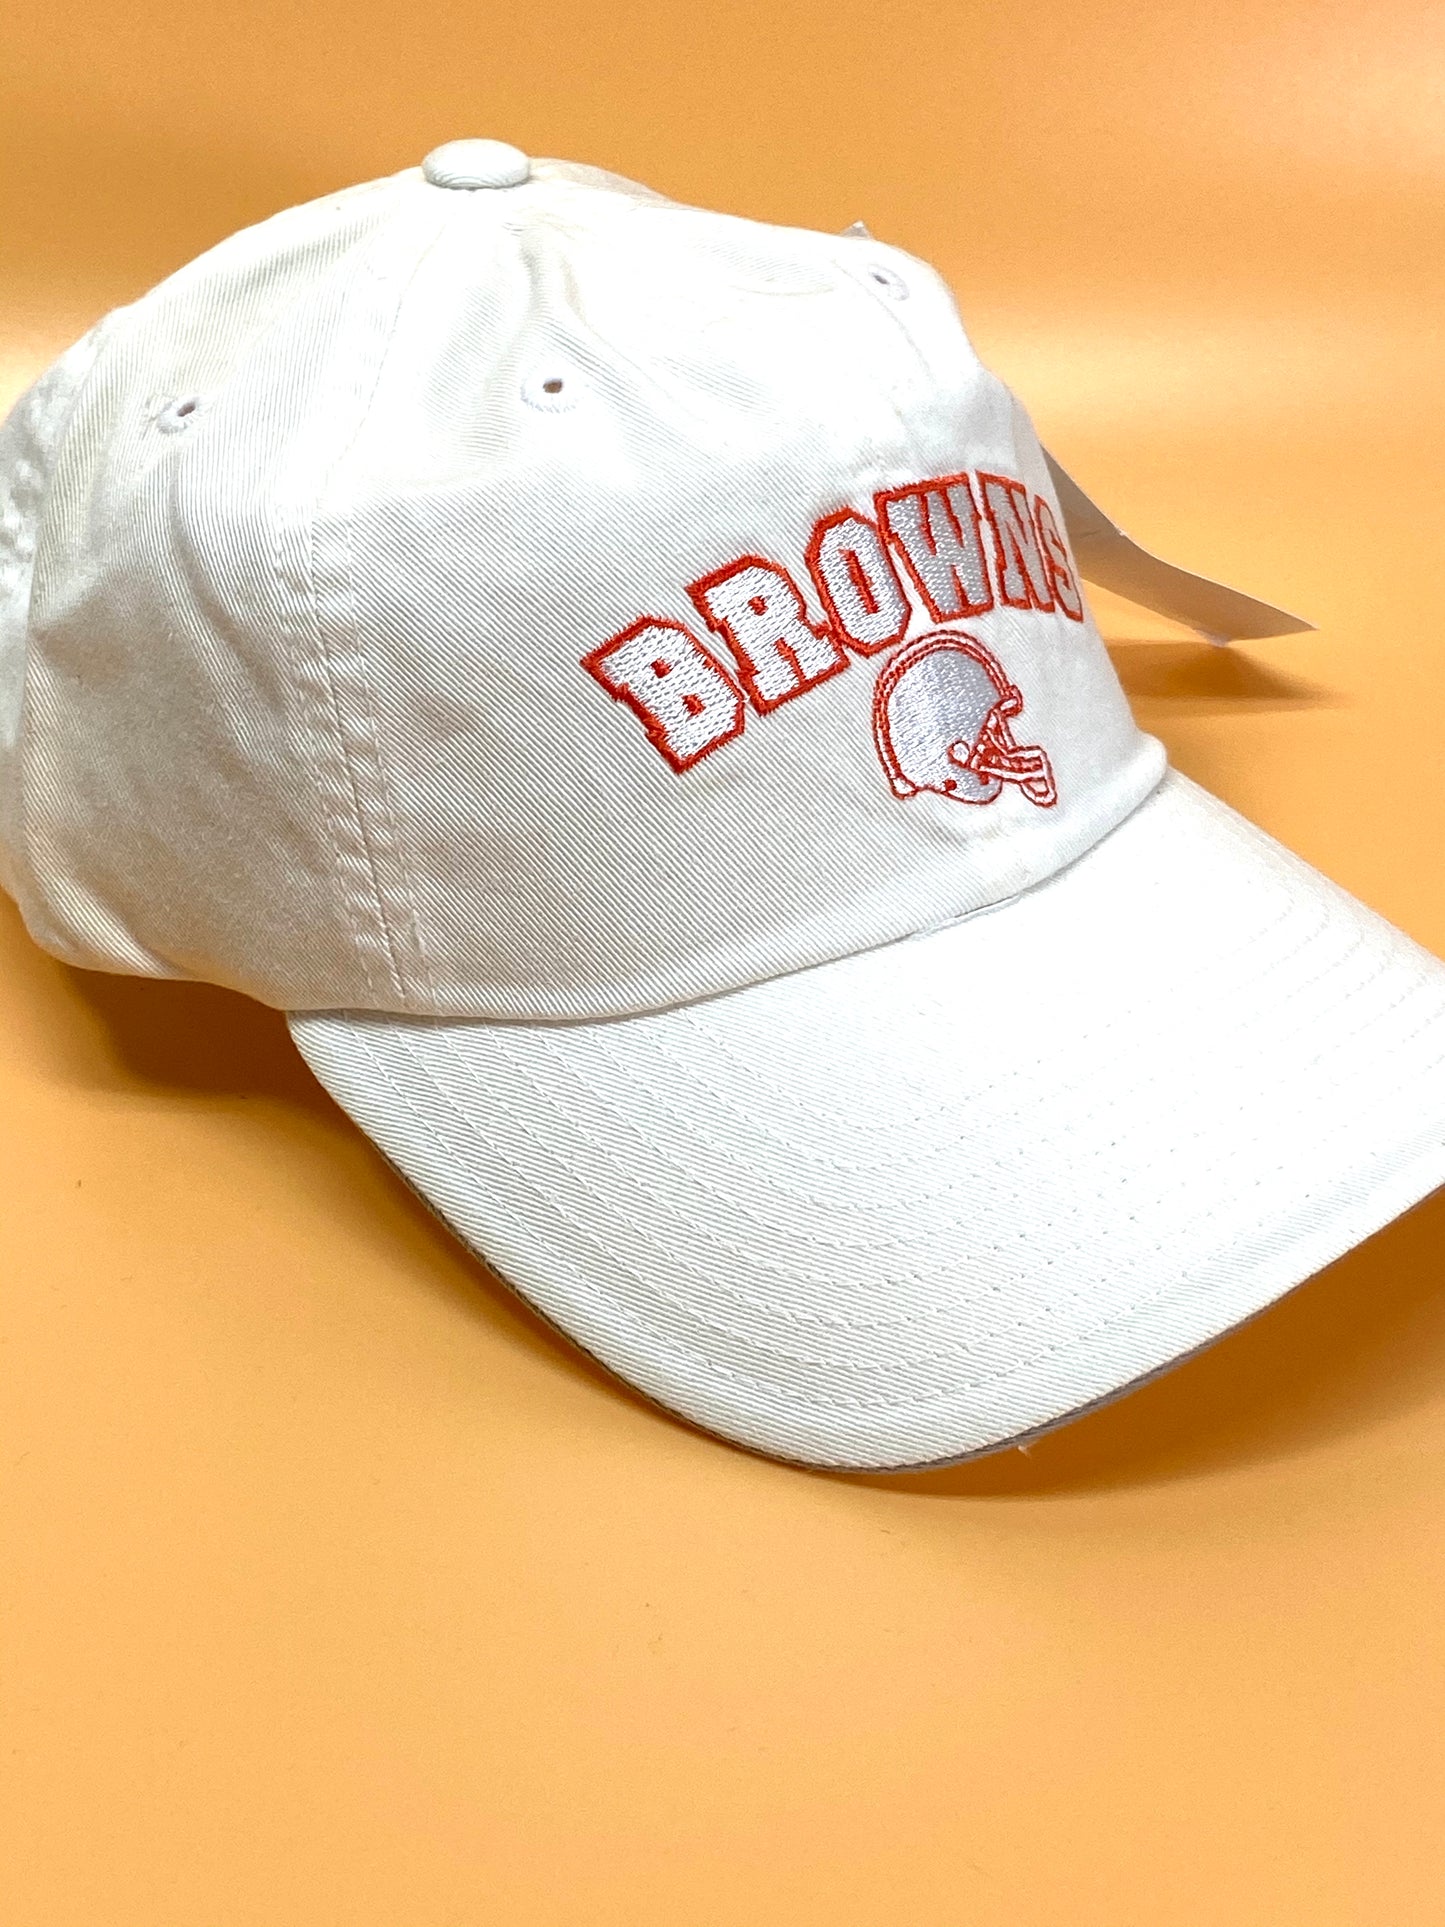 Cleveland Browns Vintage NFL Unstructured White Cap by American Needle